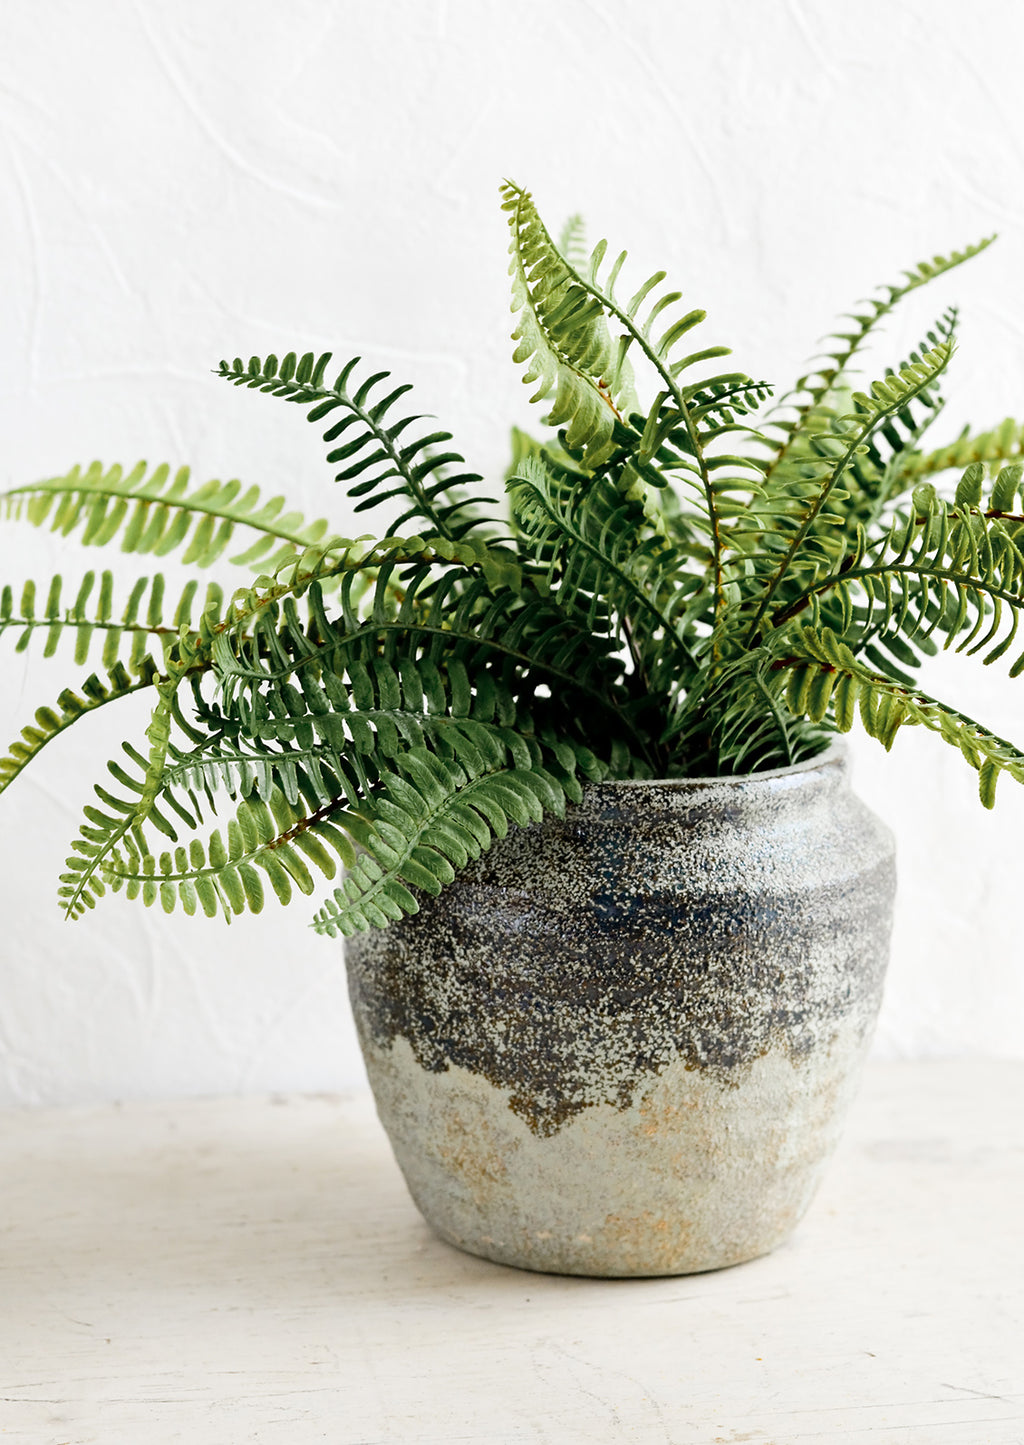 2: A ceramic planter in a distressed mossy green patina, housing a fern plant.